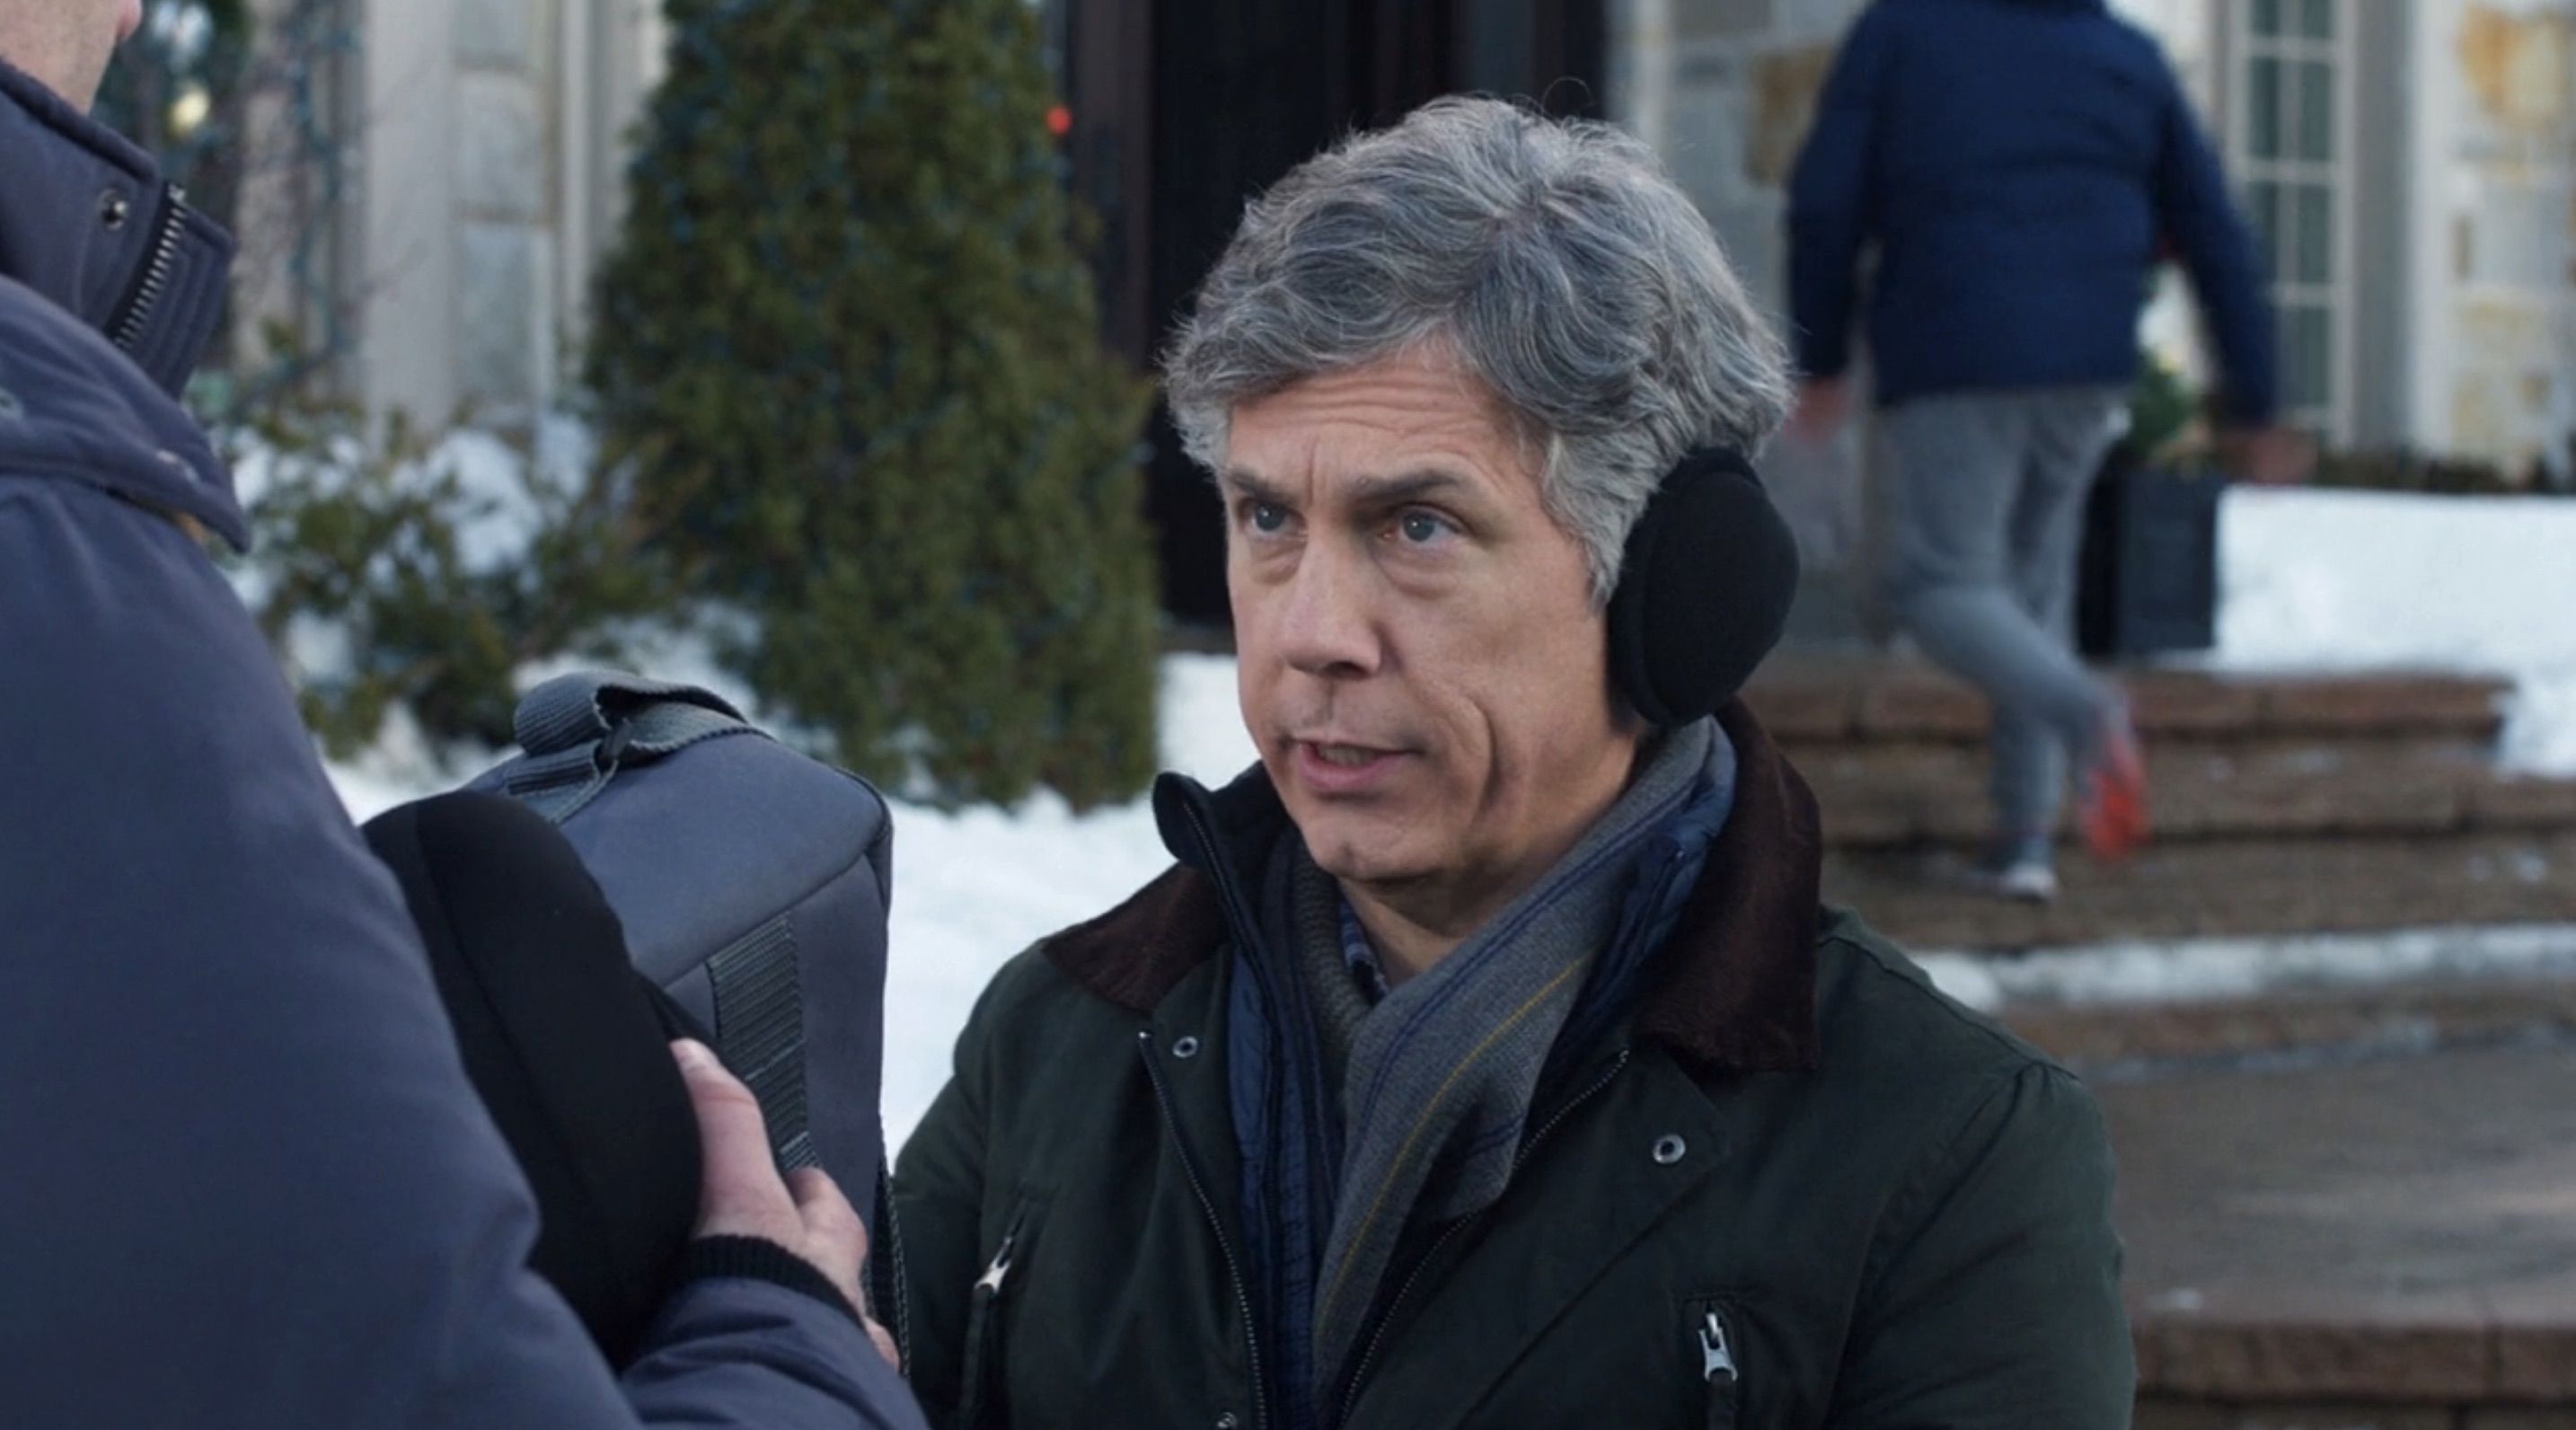 Home Sweet Home Alone Cast - Chris Parnell as Uncle Stu Mercer